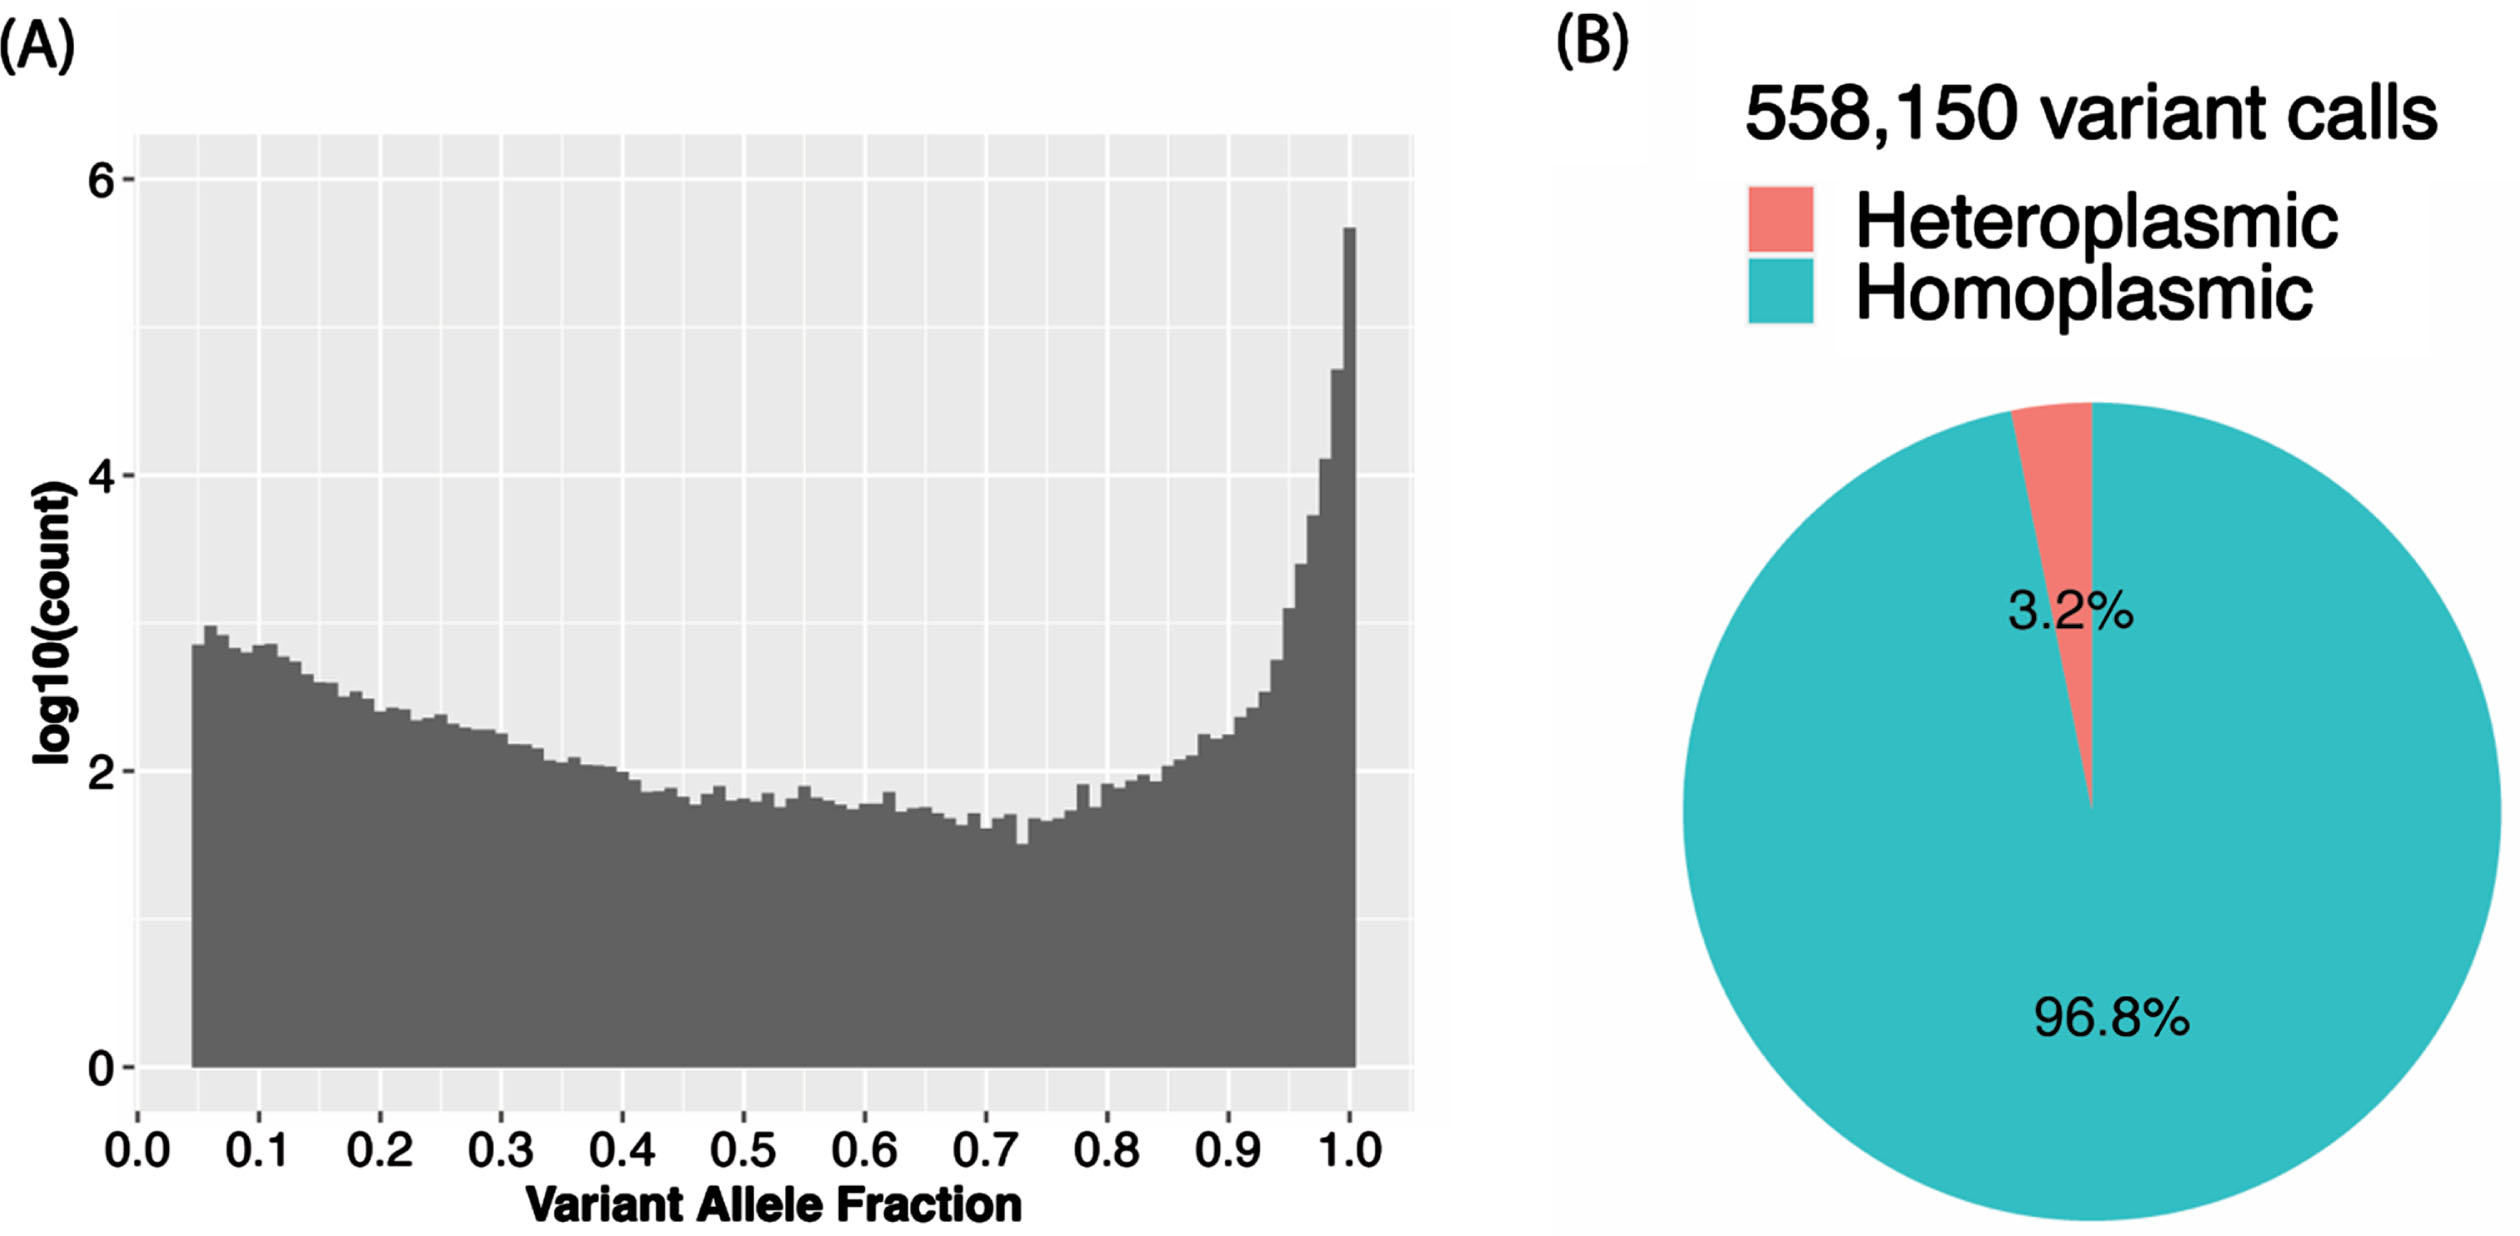 Among individuals in the total sample, (A) variant allele fraction (VAF) distribution of mtDNA variant calls and (B) proportion of heteroplasmic calls and homoplasmic calls.